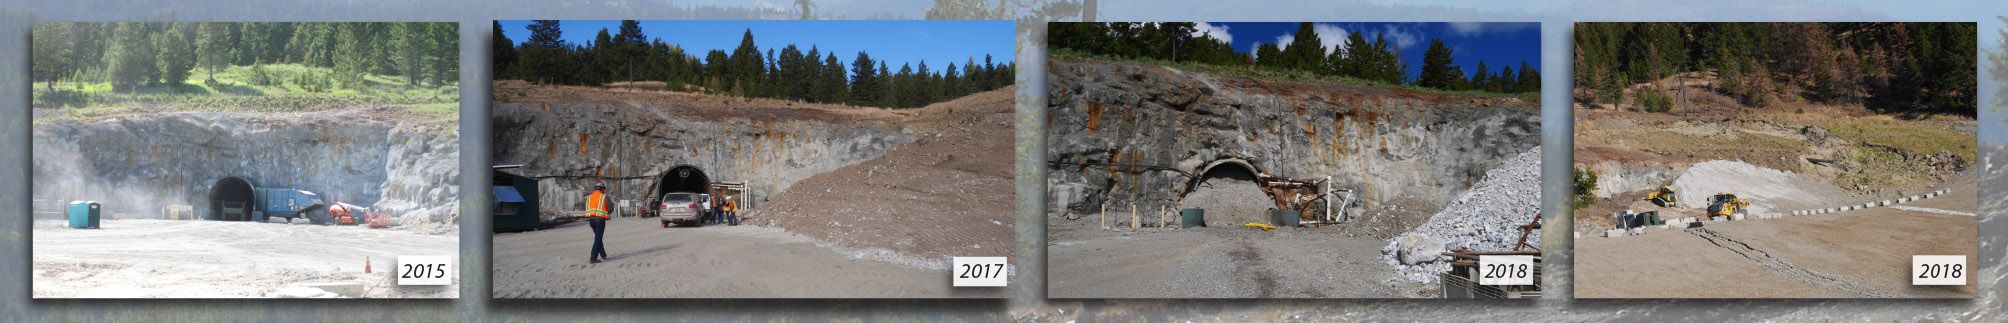 Gold Bowl portal, before and during reclamation